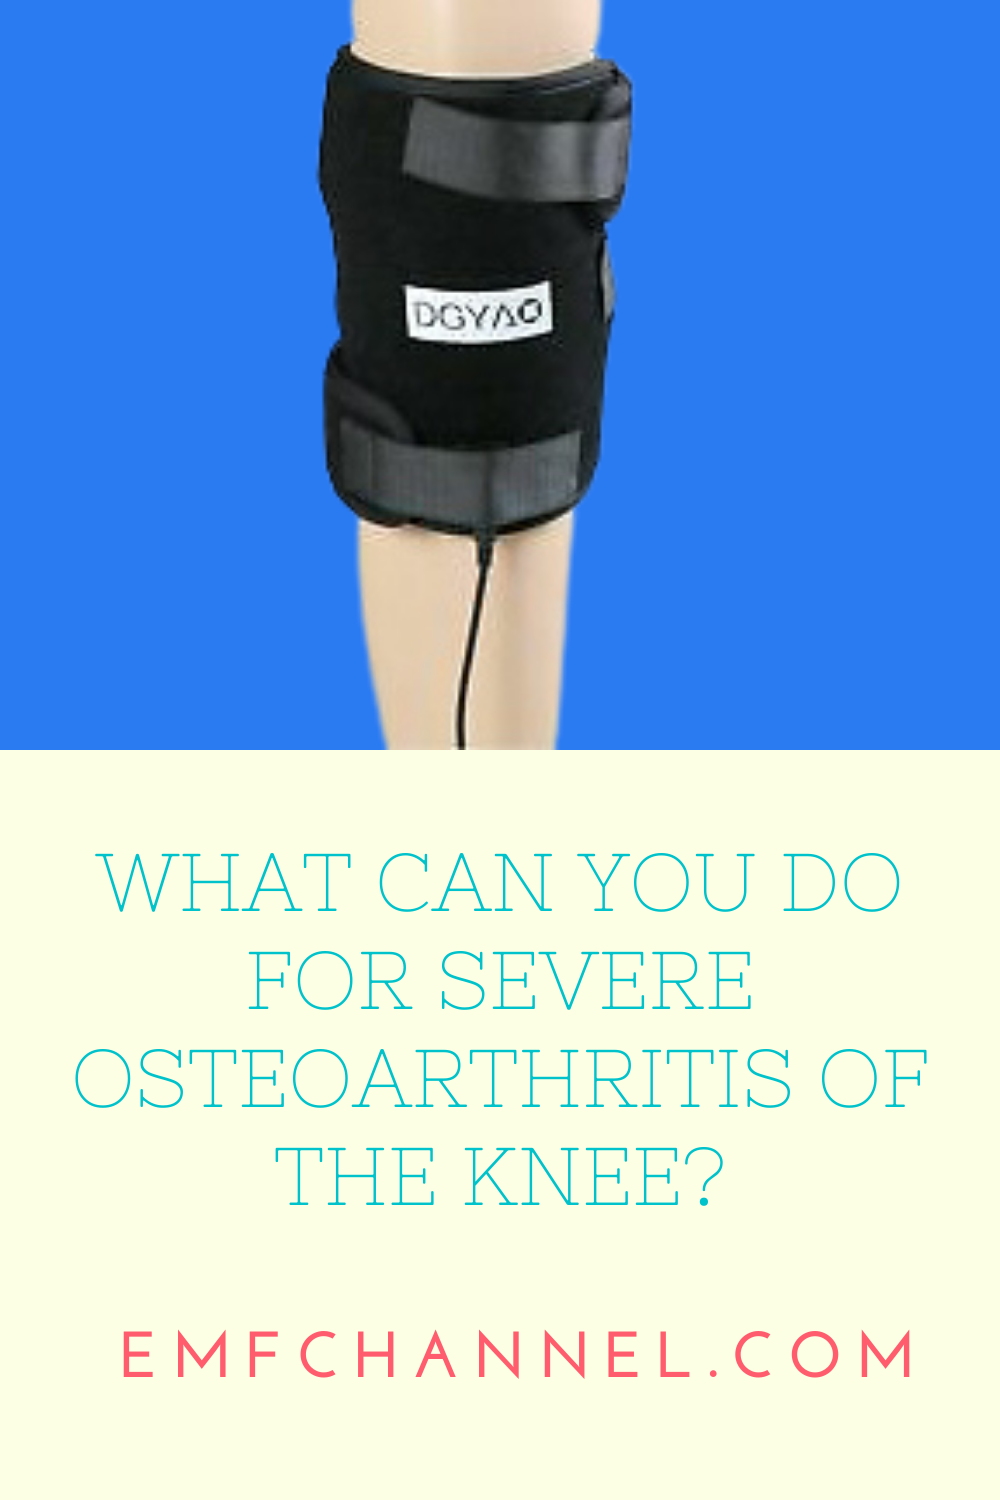 What Can You Do for Severe Osteoarthritis of the Knee?